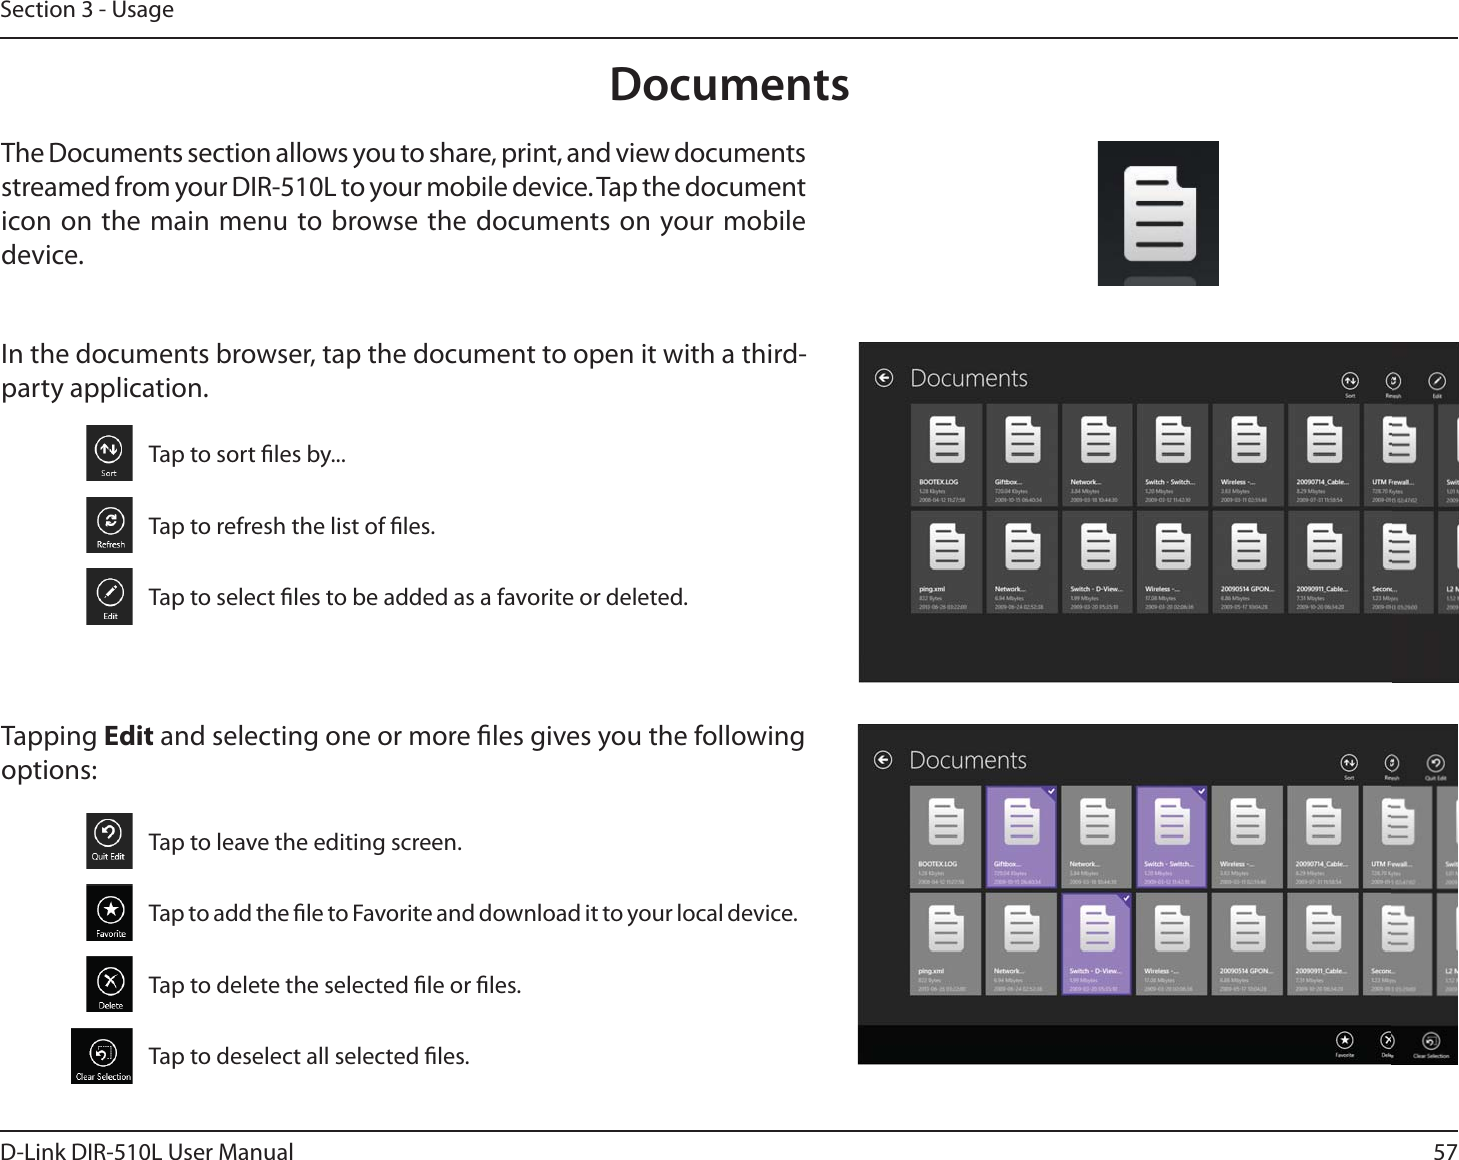 57D-Link DIR-510L User ManualSection 3 - UsageDocumentsThe Documents section allows you to share, print, and view documents streamed from your DIR-510L to your mobile device. Tap the document icon on the main menu to browse the documents on your mobile device.In the documents browser, tap the document to open it with a third-party application.Tap to sort les by...Tap to refresh the list of les.Tap to select les to be added as a favorite or deleted.Tapping Edit and selecting one or more les gives you the following options:Tap to leave the editing screen.Tap to add the le to Favorite and download it to your local device.Tap to delete the selected le or les.Tap to deselect all selected les.